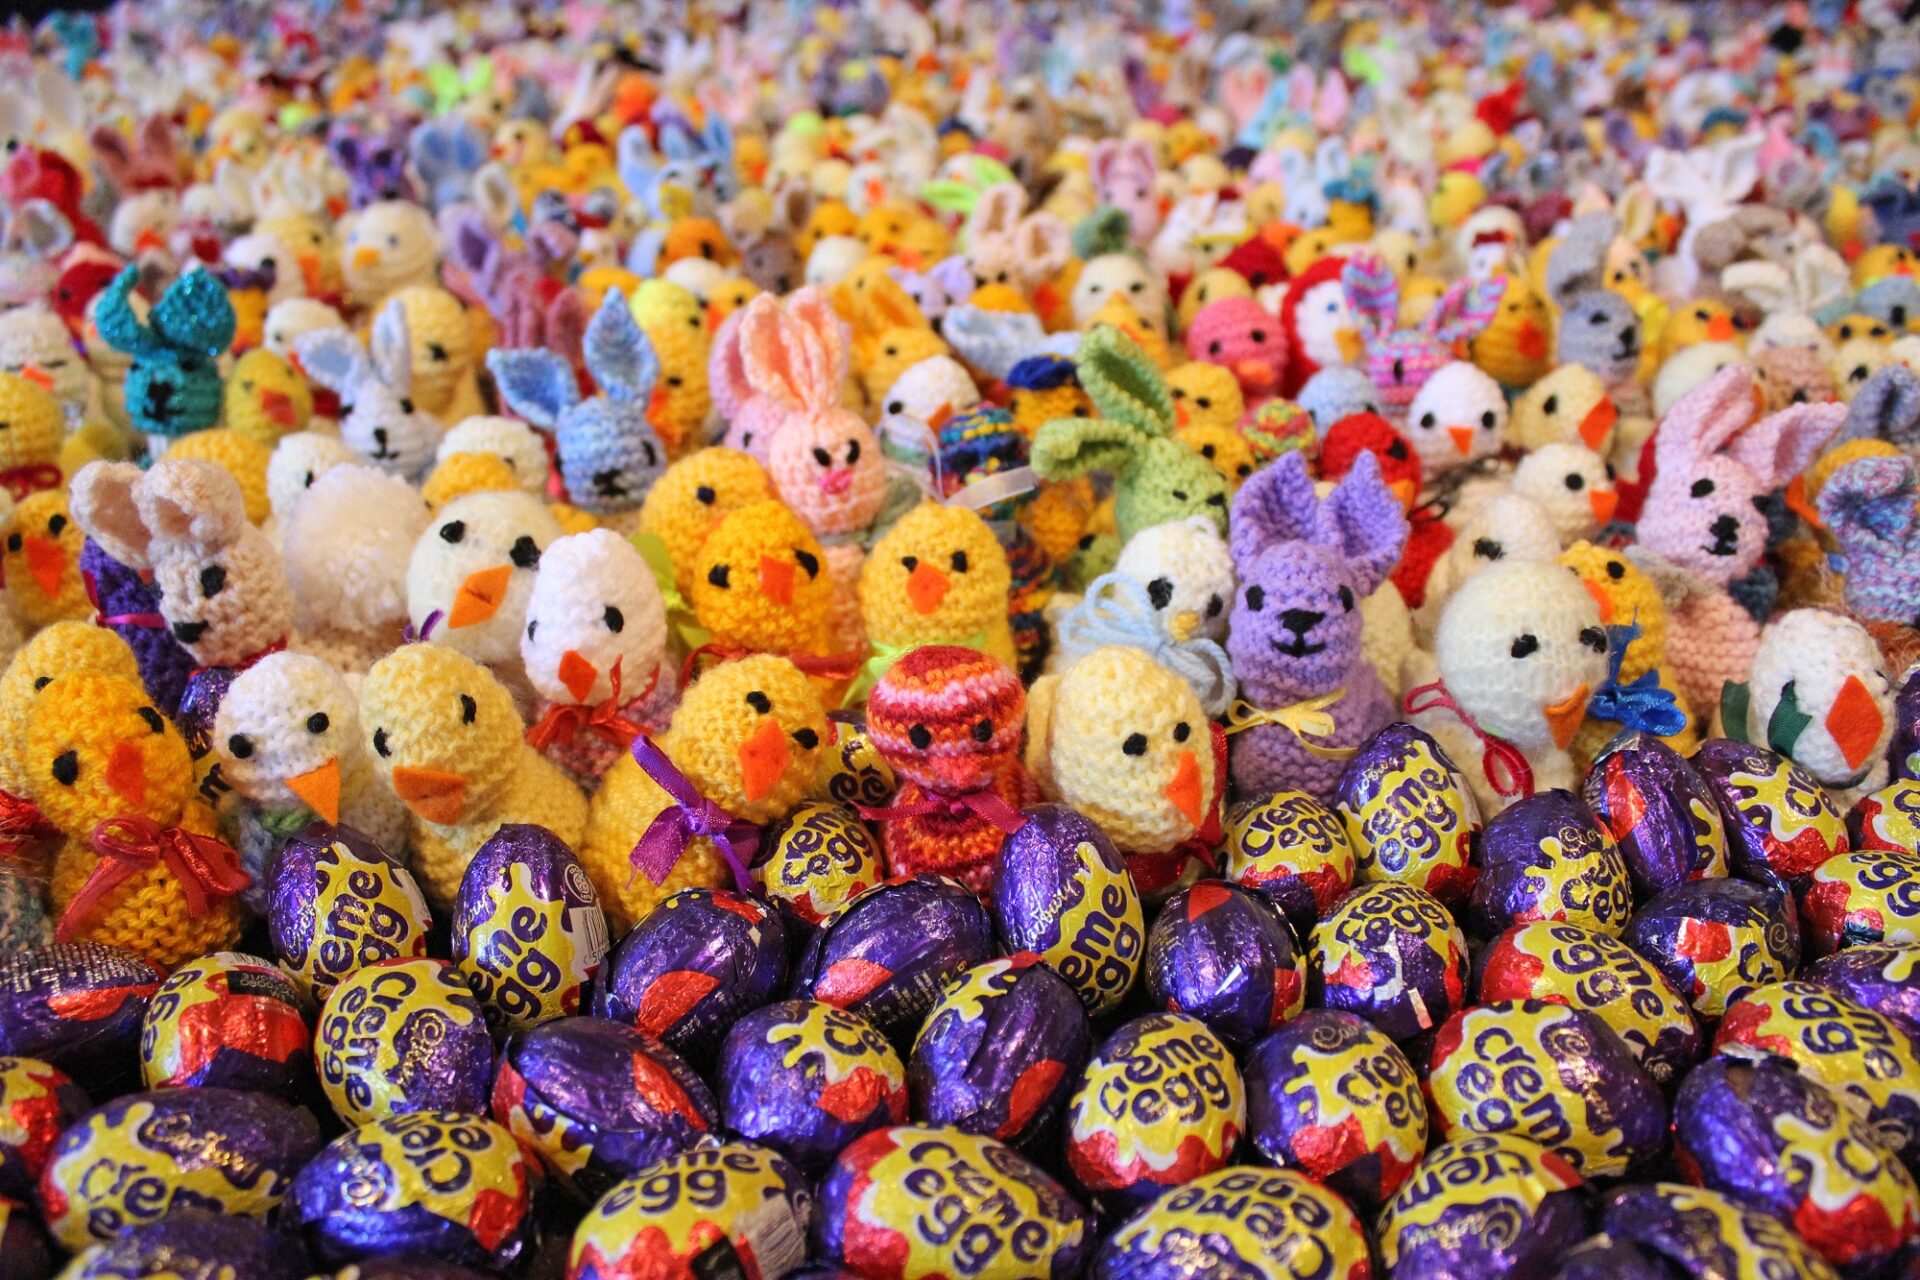 Rows of knitted chicks in front of rows of chocolate creme eggs